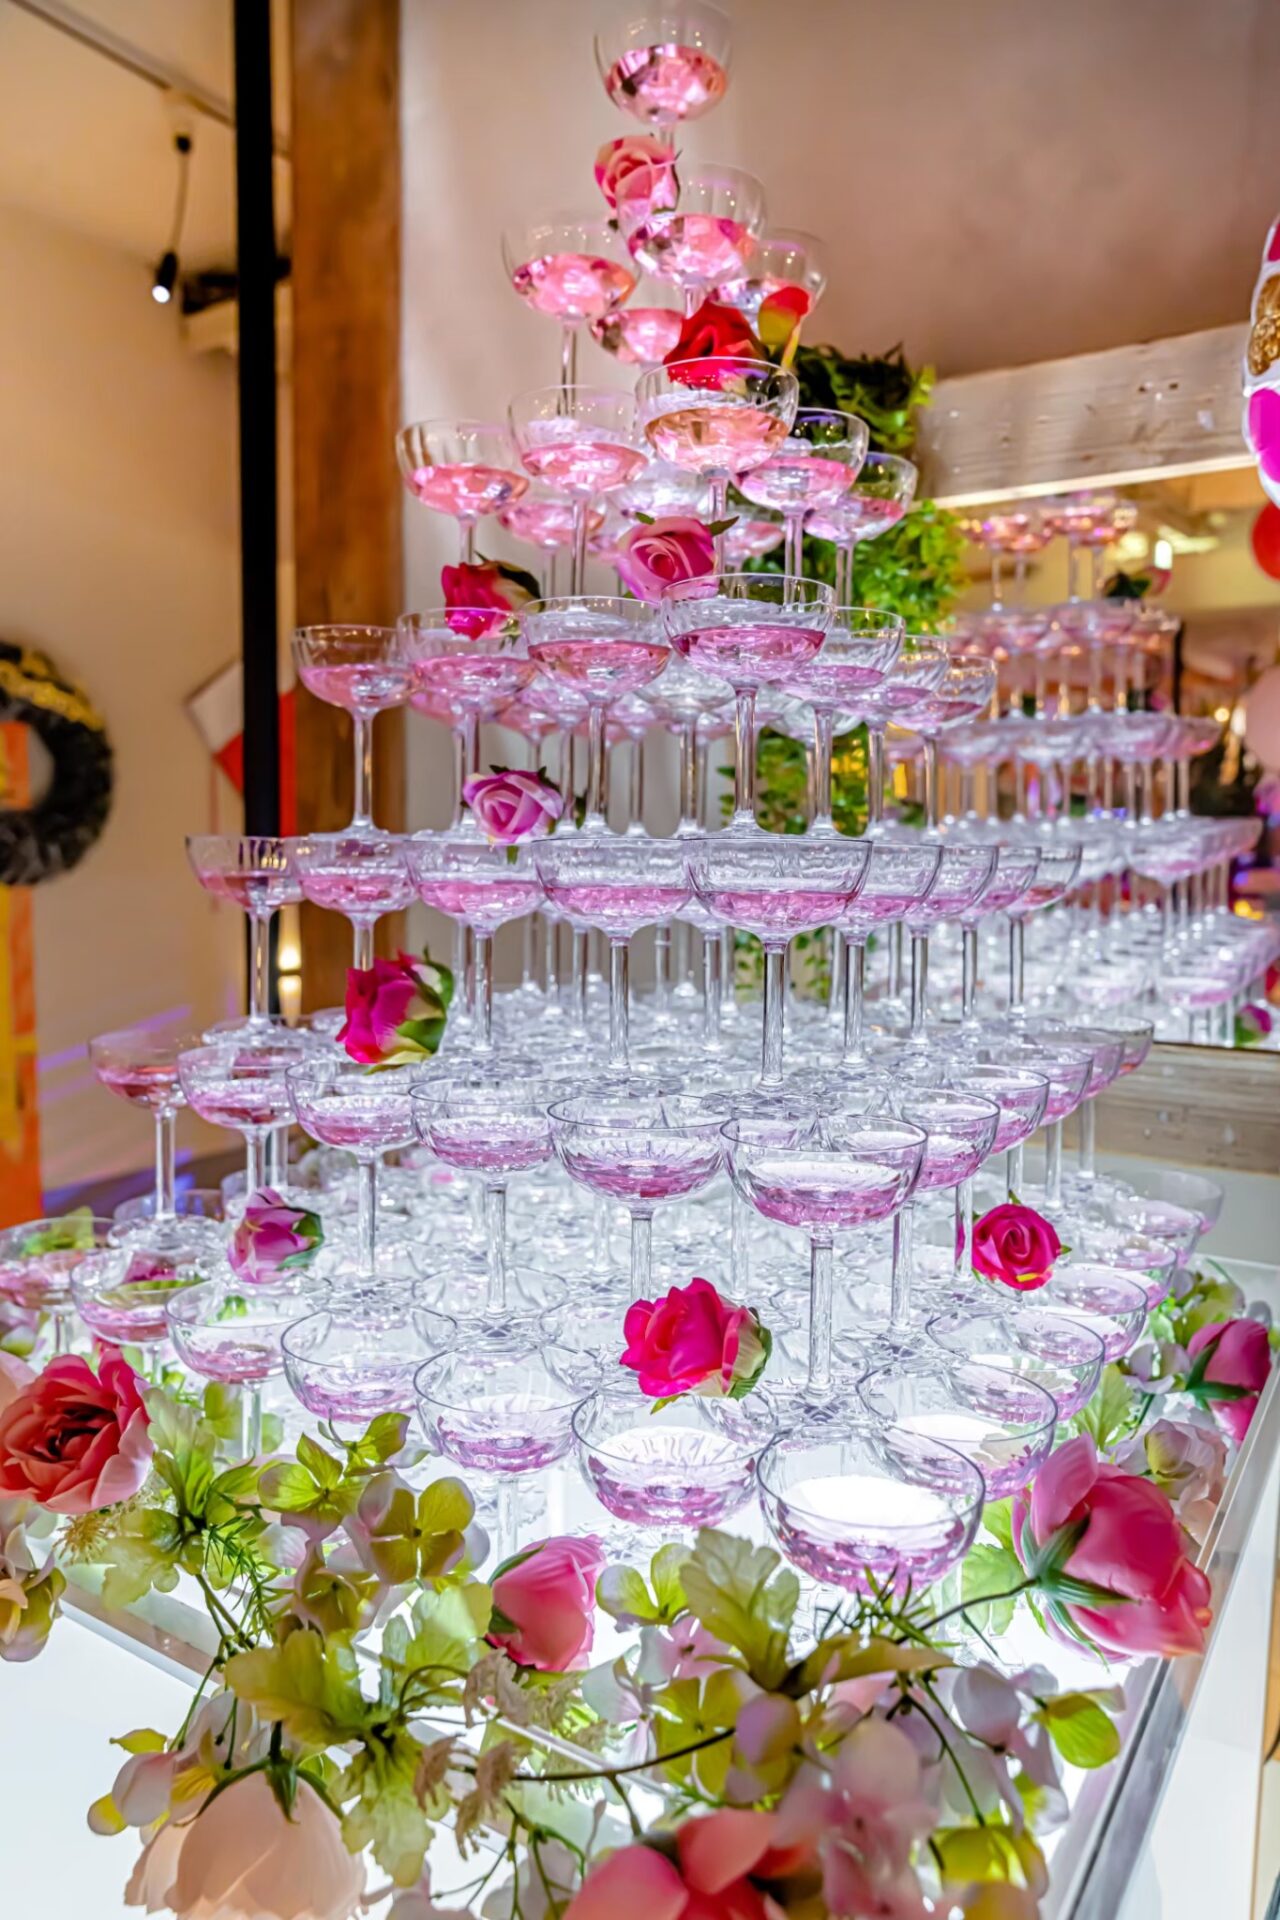 Champagne tower with pretty pink flowers and glasses inside.